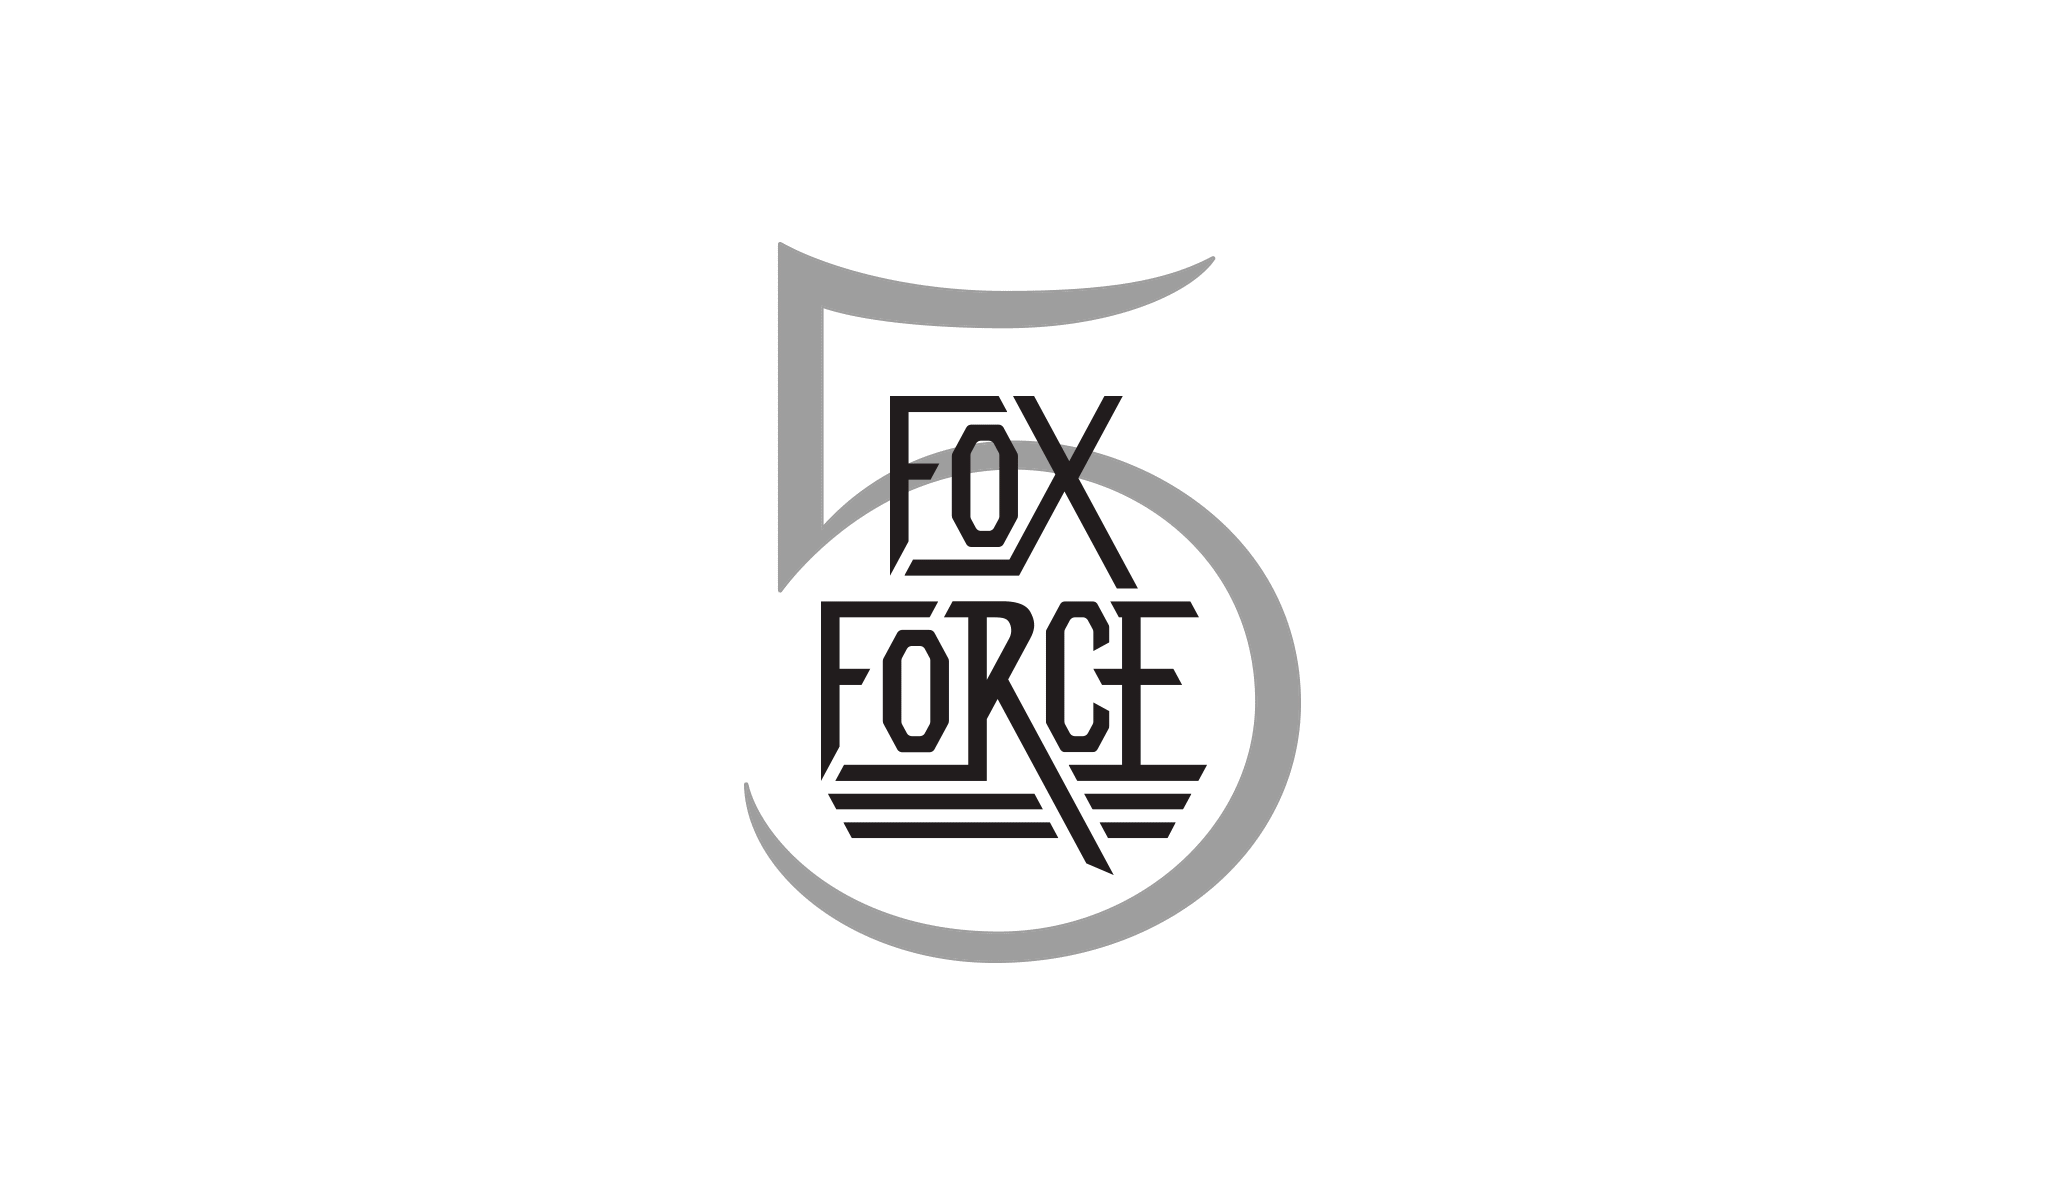 Fox Force 5 Lettering Process